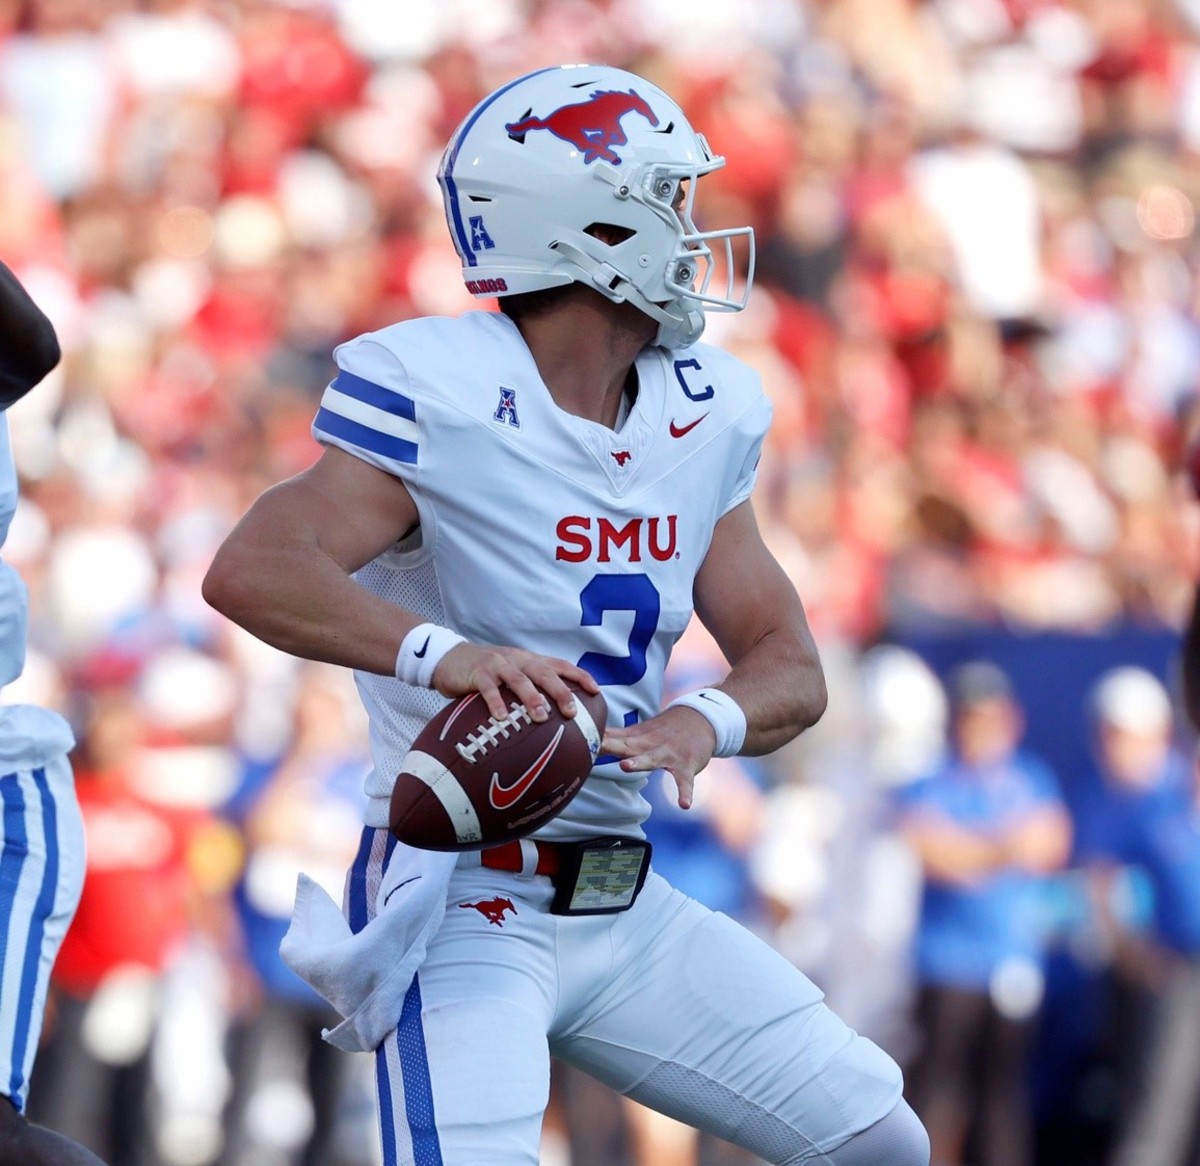 SMU's Preston Stone (2) looks to throw a pass in the first half during the college football game between the University of Oklahoma Sooners and the Southern Methodist University Mustangs at the Gaylord Family Oklahoma Memorial Stadium in Norman, Okla., Saturday, Sept. 9, 2023.